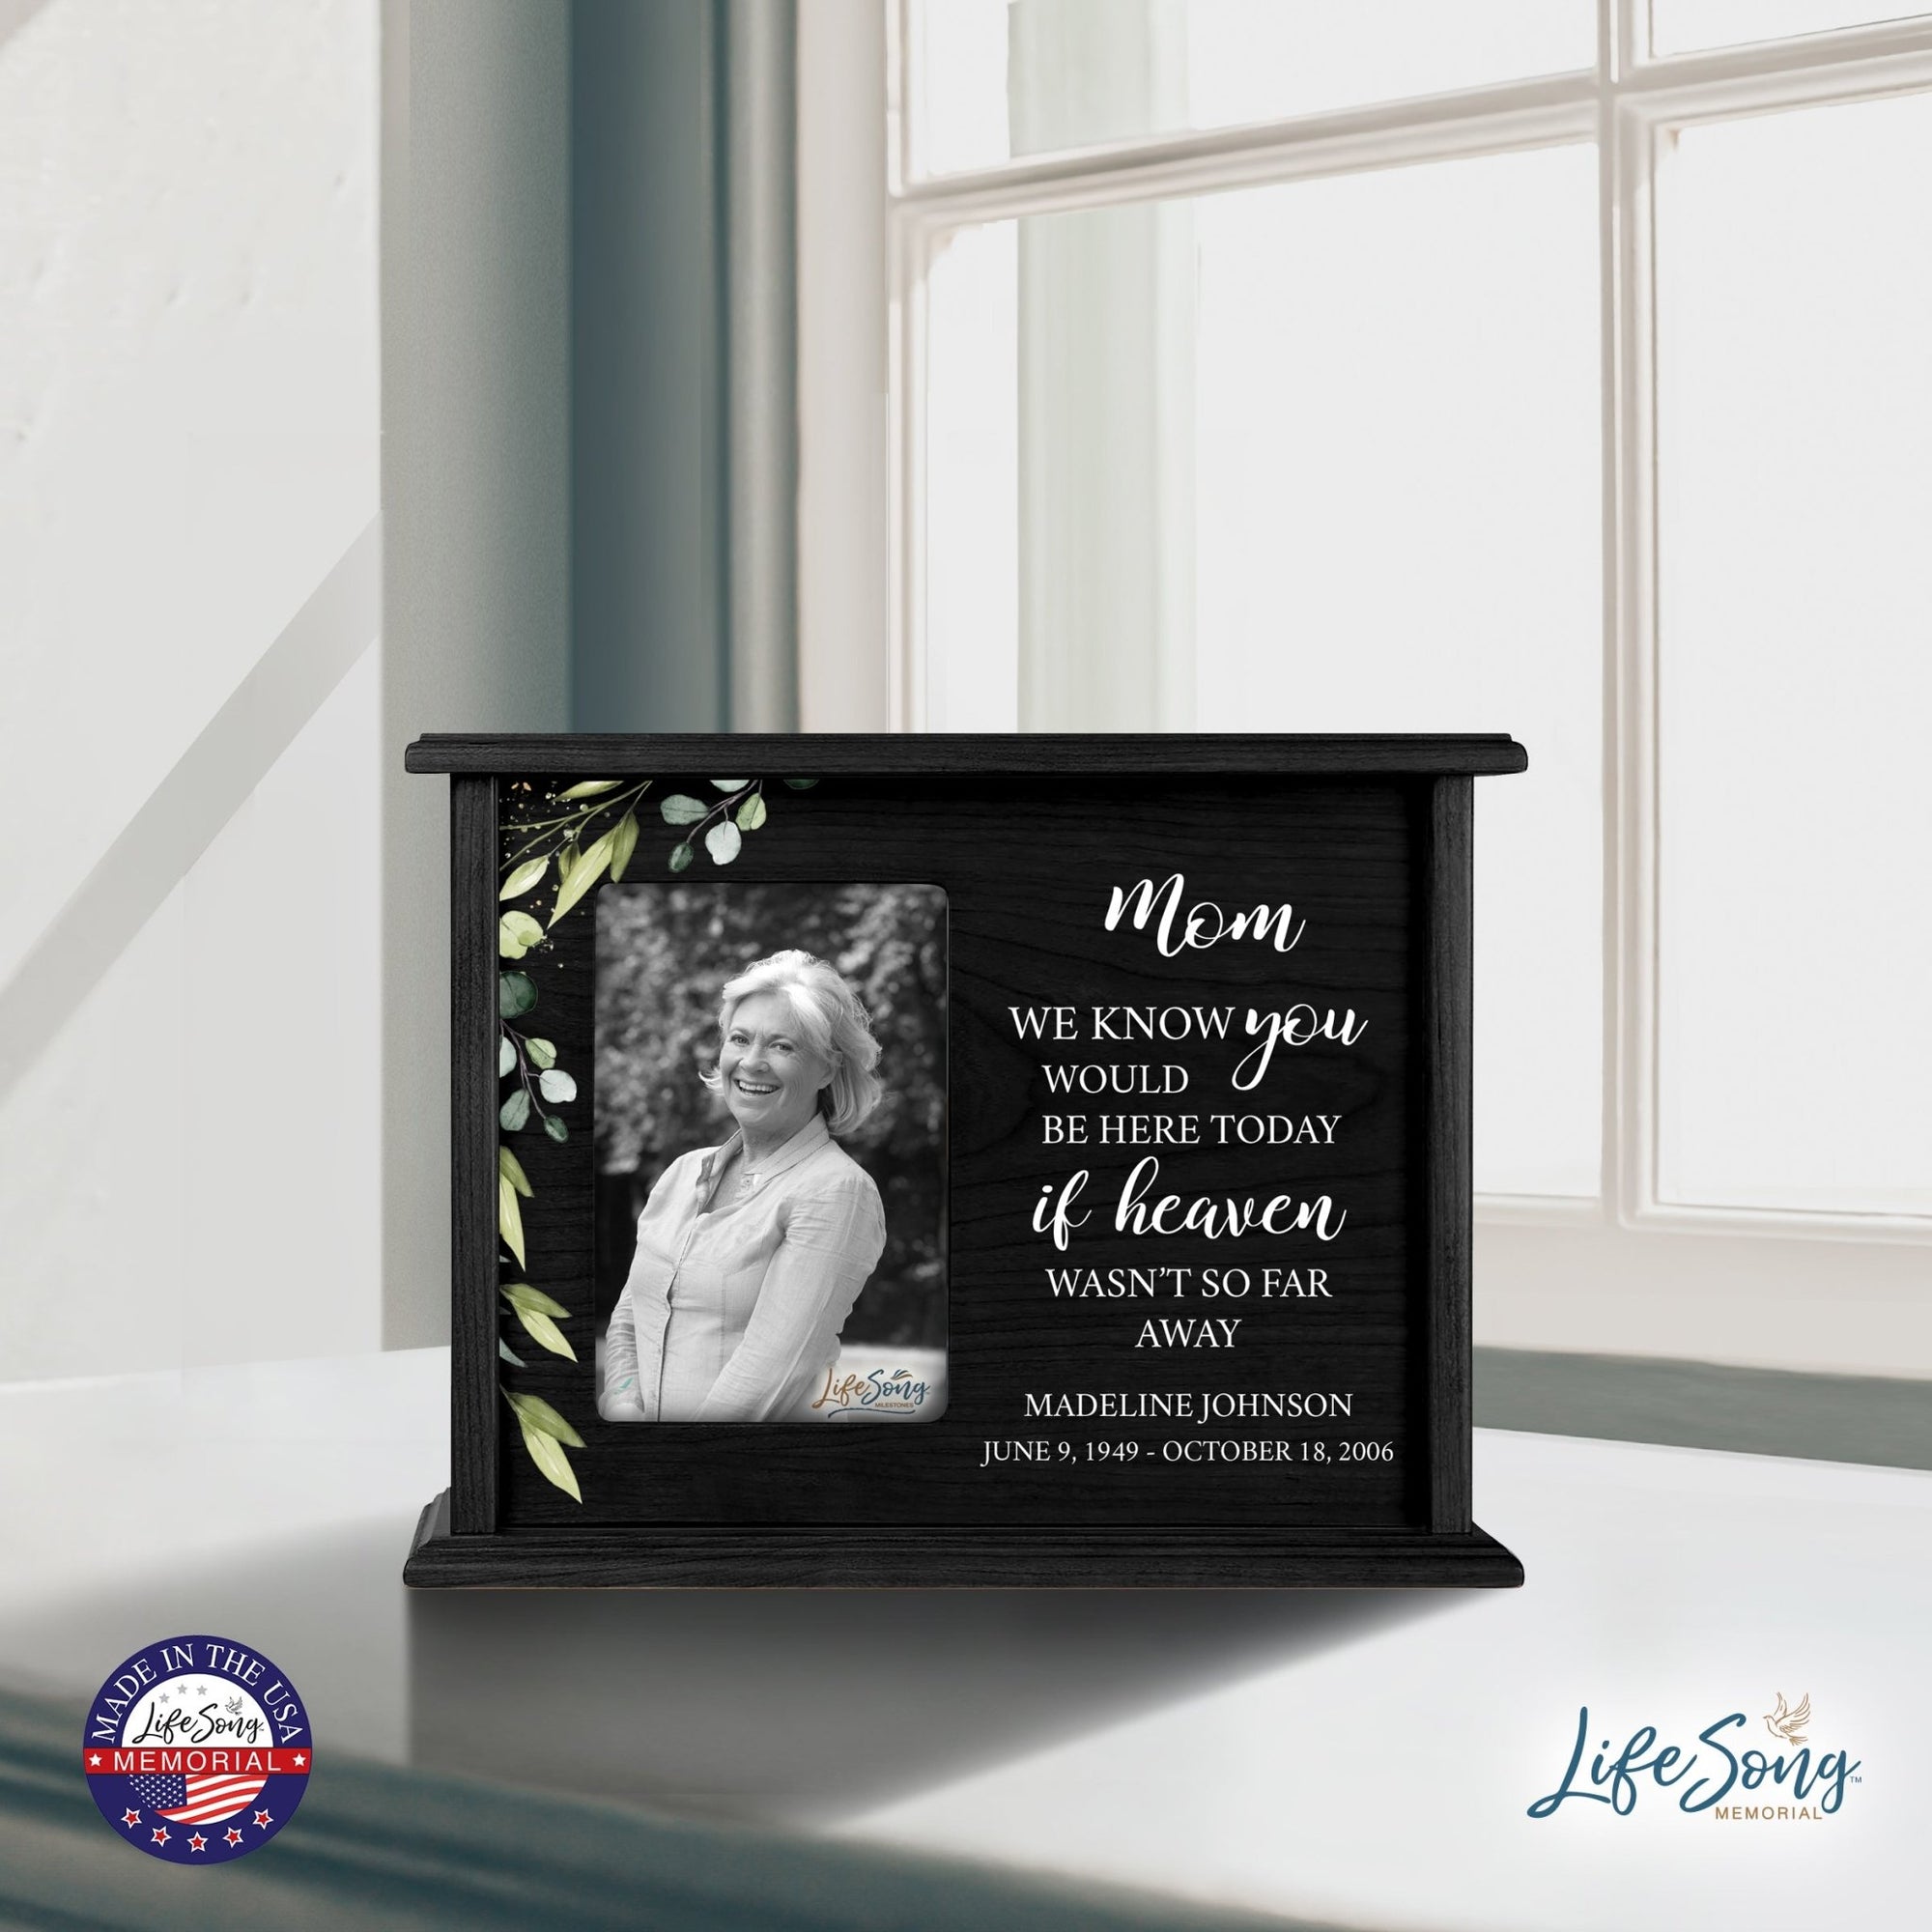 Personalized Memorial Cherry Wood 12 x 4.5 x 9 Cremation Urn Box with Picture Frame holds 200 cu in of Human Ashes and 4x6 Photo - We Know You Would (Black) - LifeSong Milestones